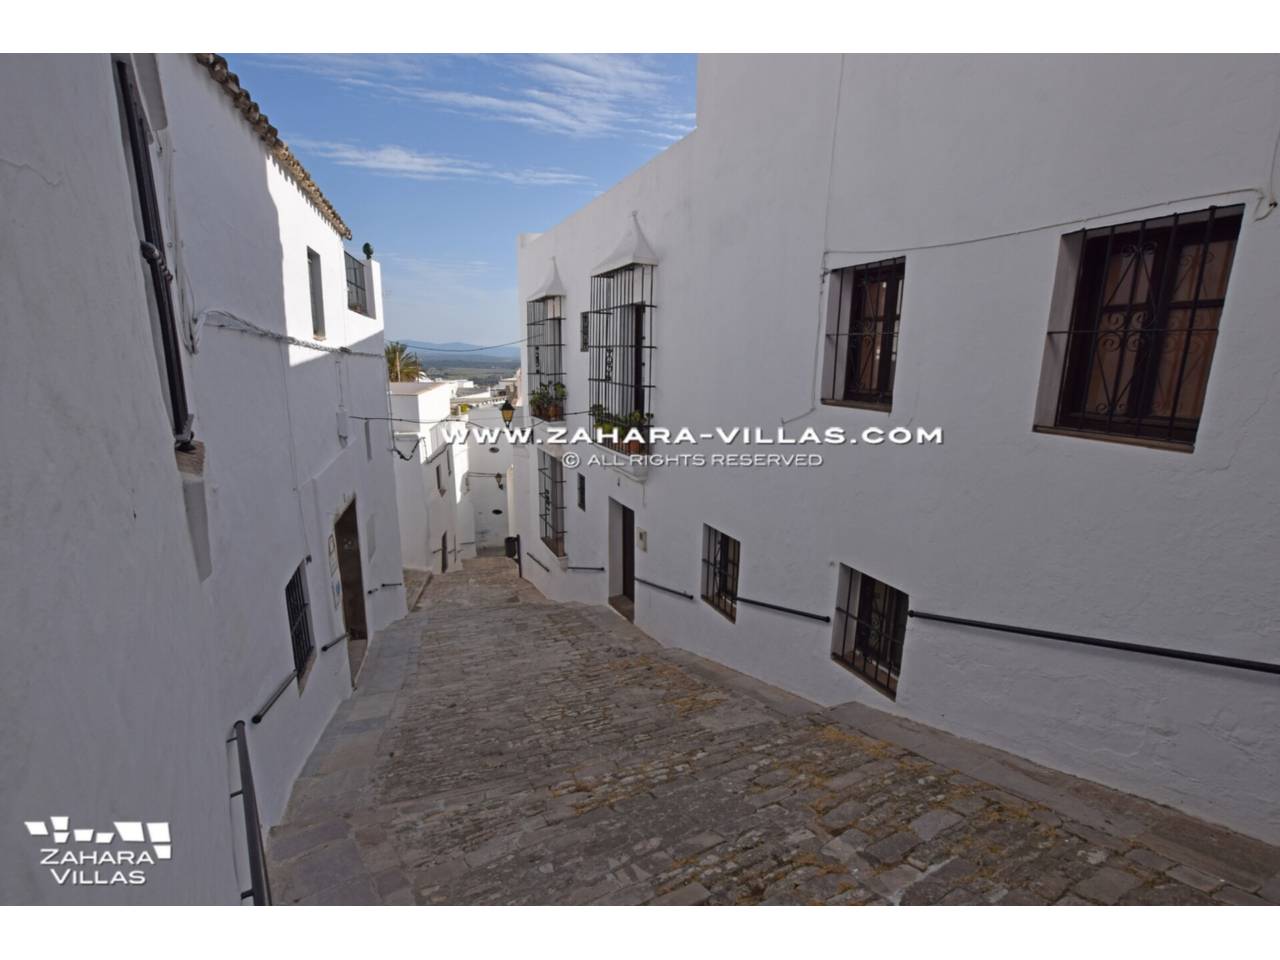 Imagen 85 de Magnificent House with central patio, in the historic center of the town